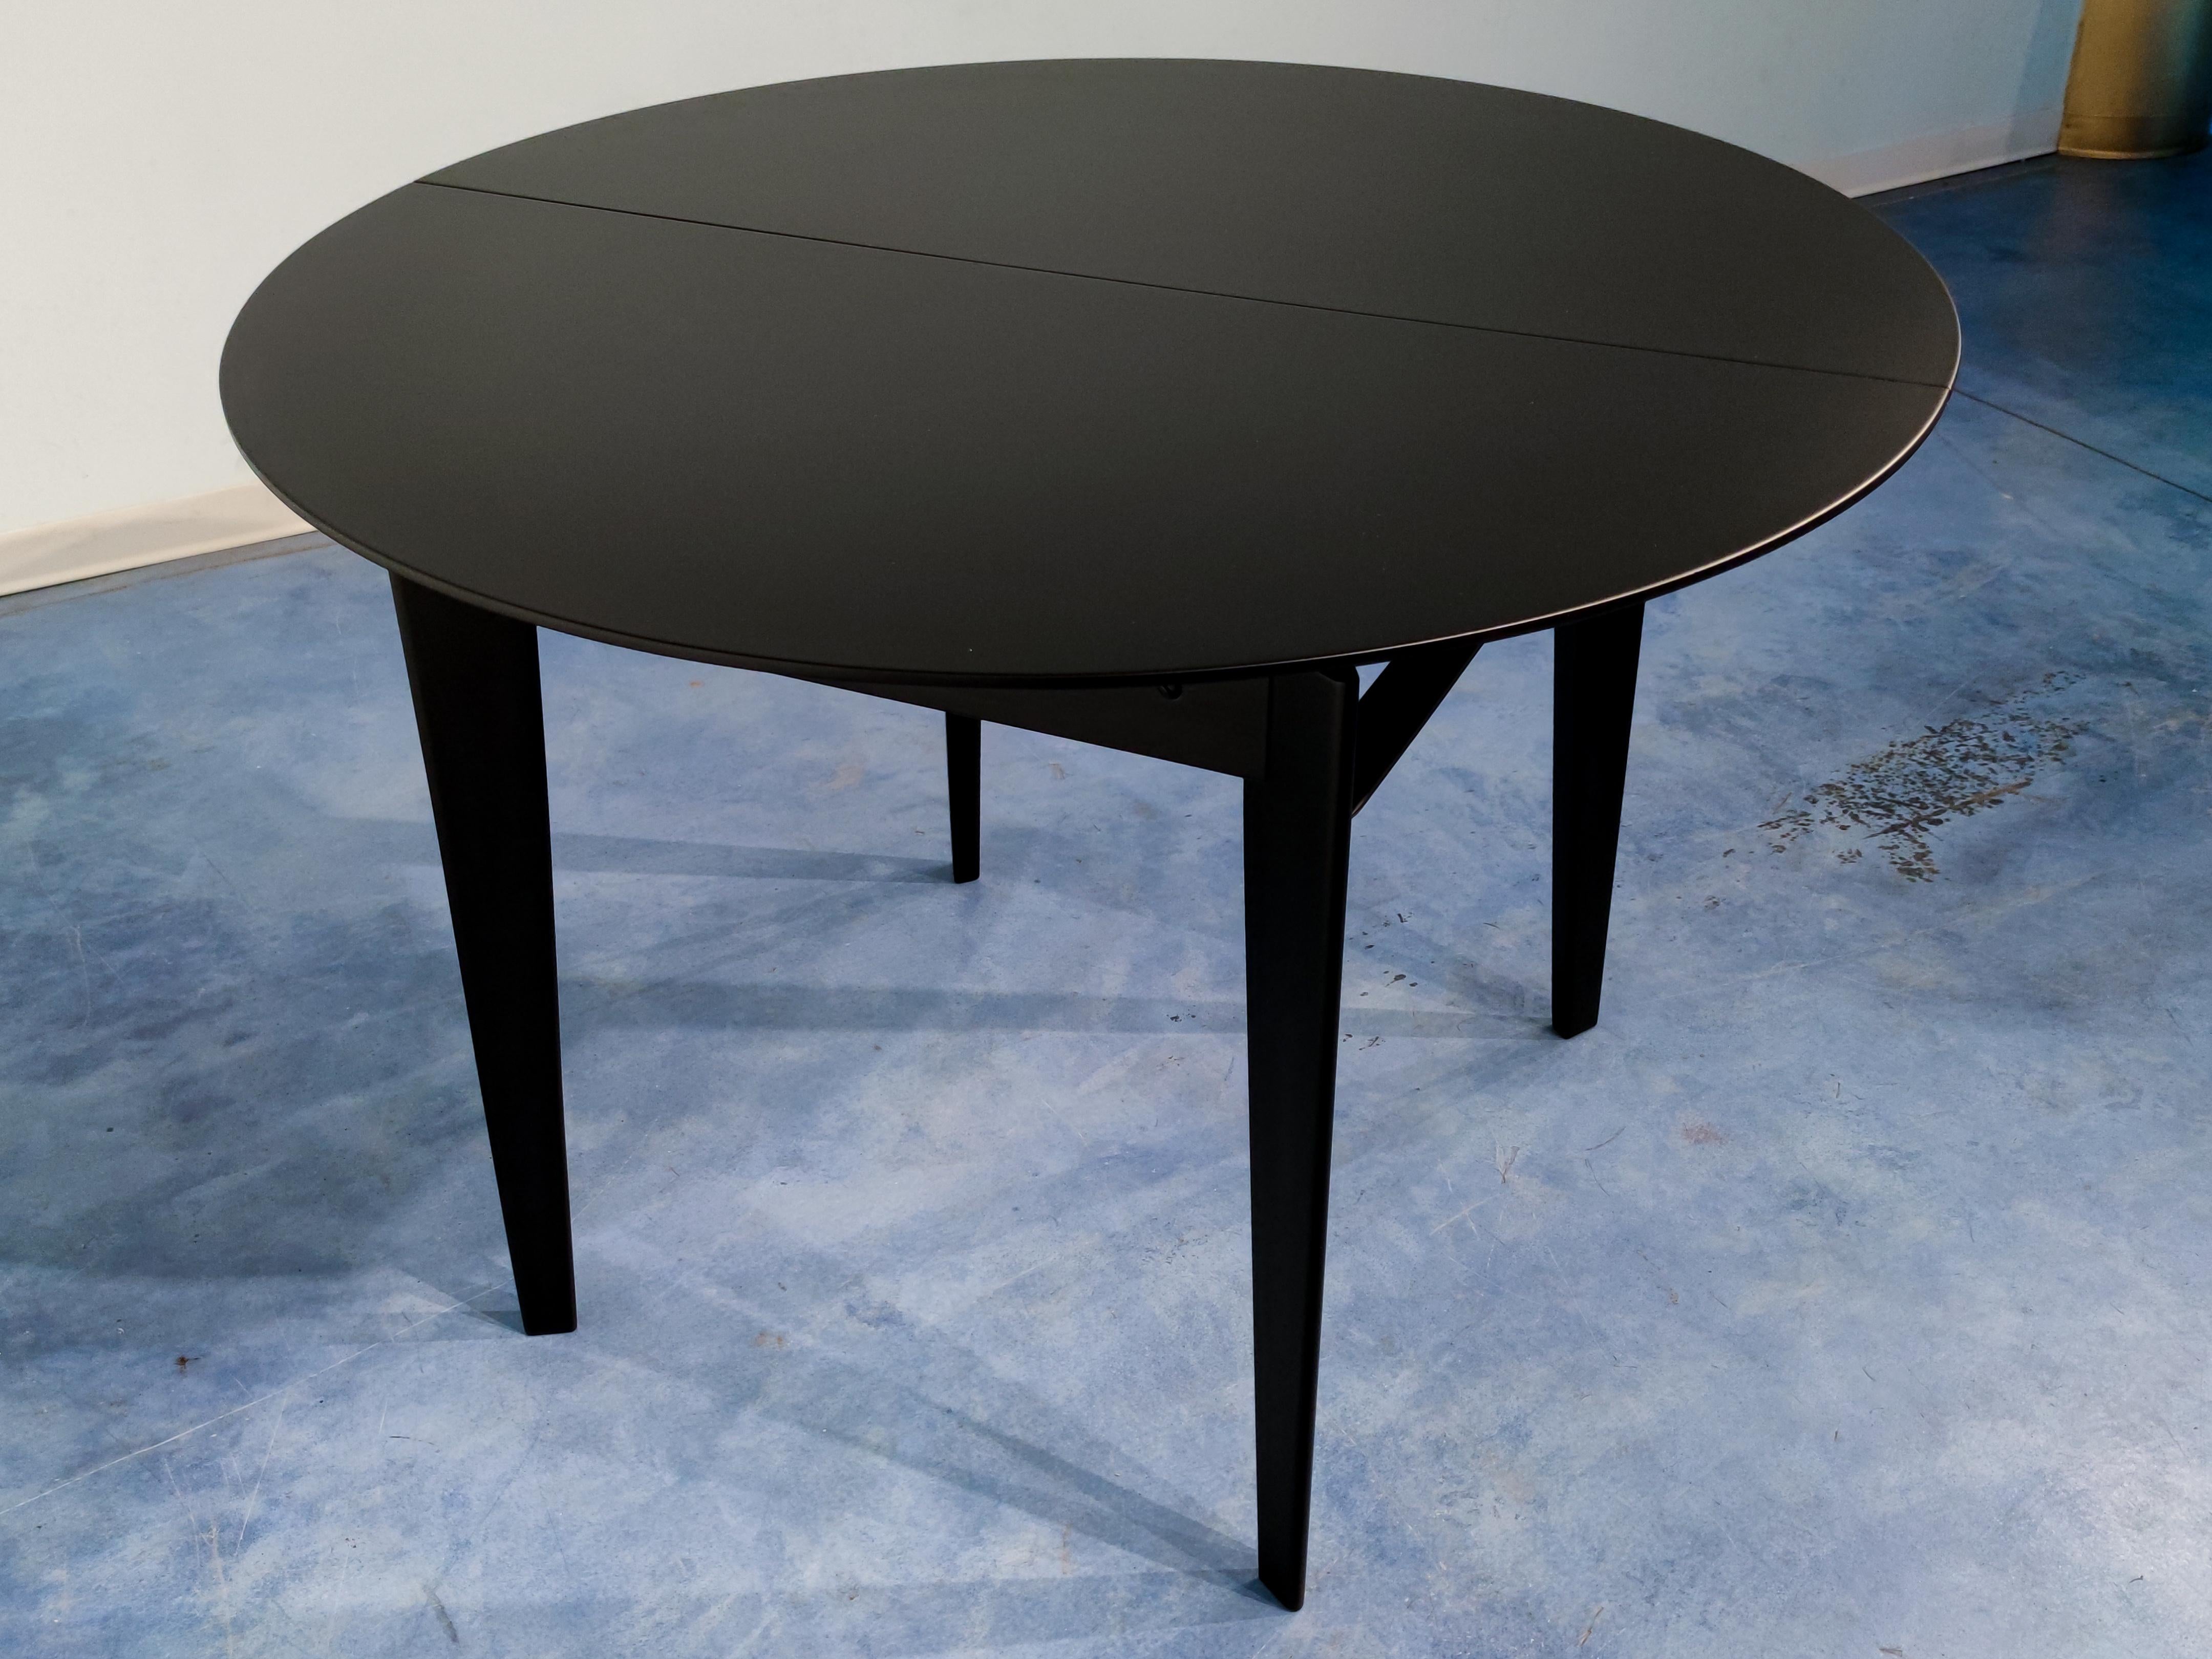 Italian Midcentury Extendable Dining Table by Vittorio Dassi, 1950s For Sale 1